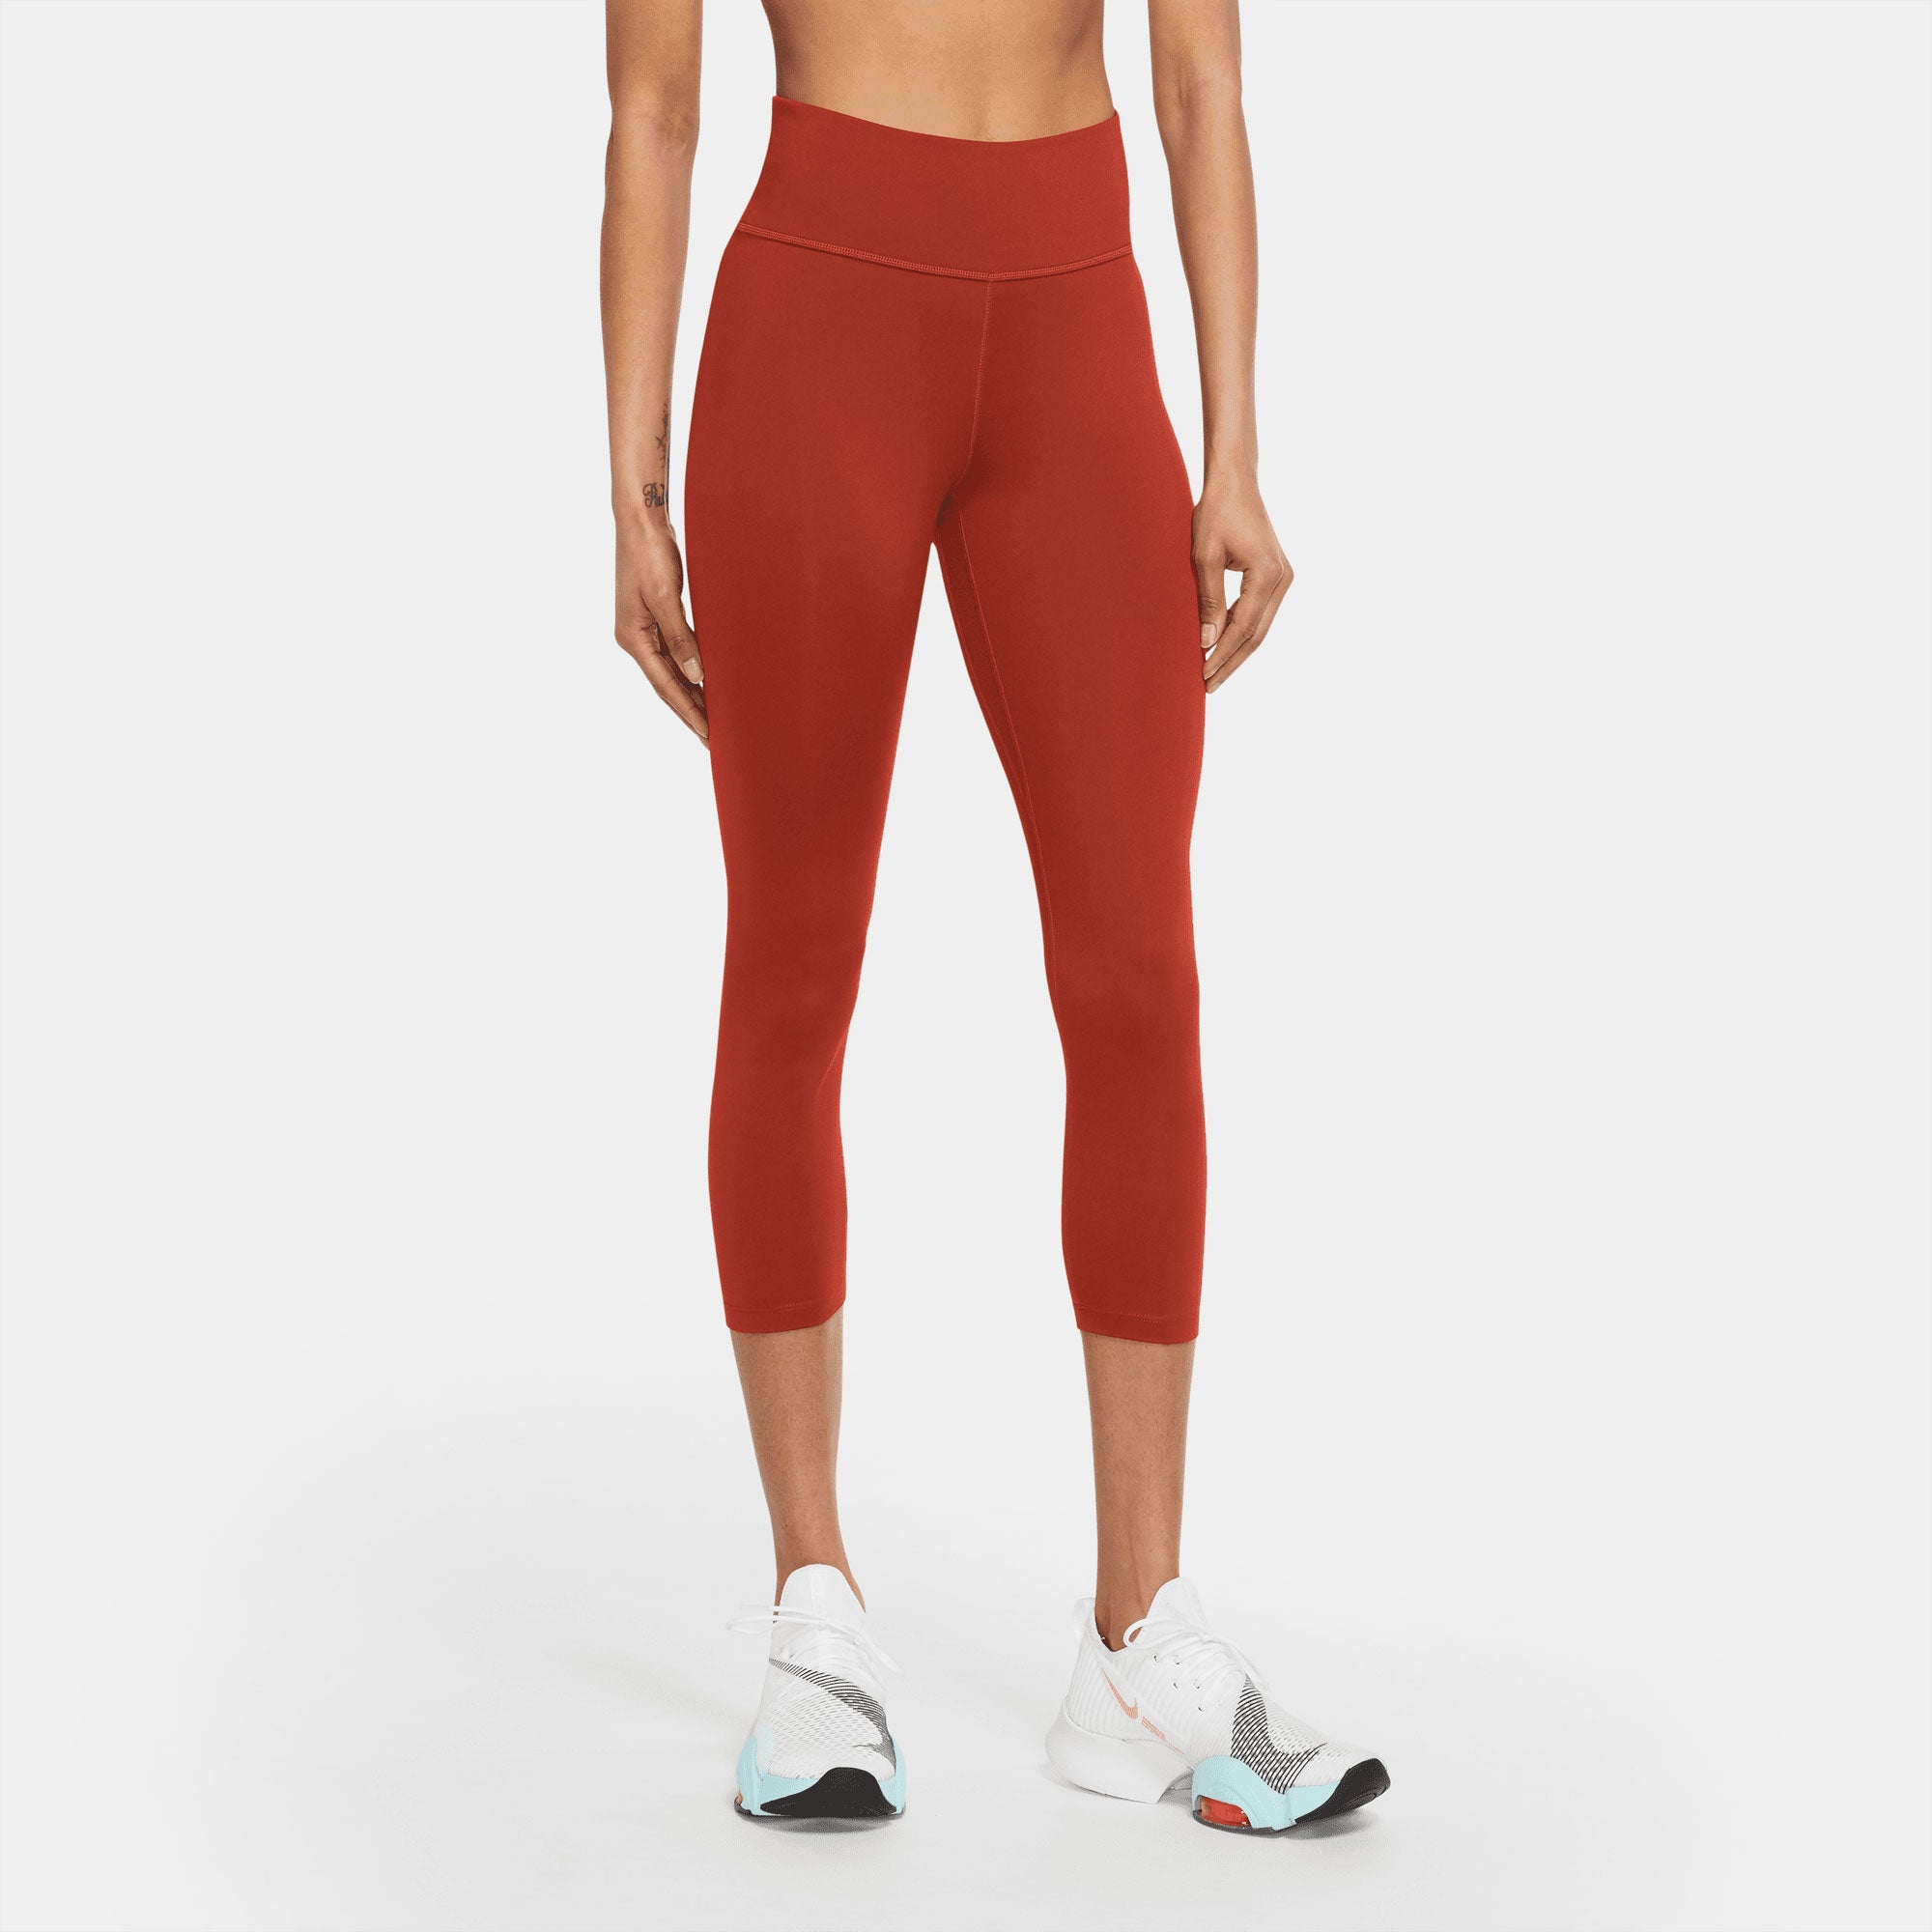 NEW Nike One Women's Mid-Rise Crop Training Tights - BV0001-010